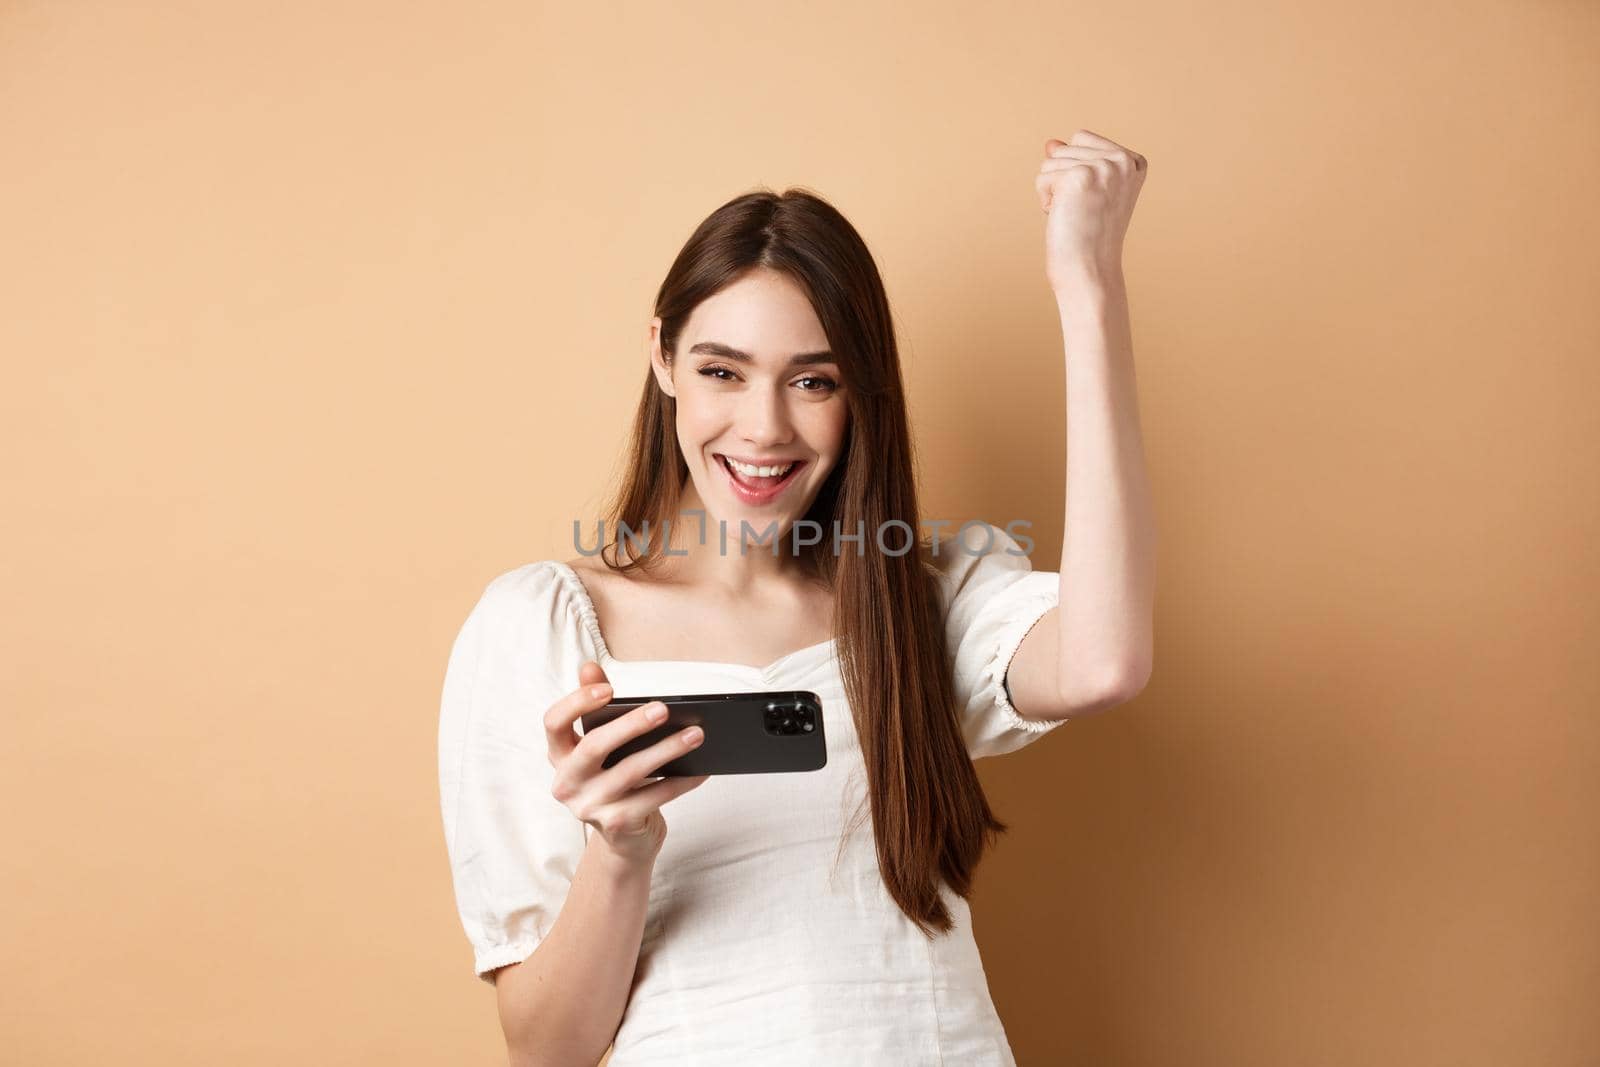 Girl winning on mobile phone. Happy woman raising hand up and scream yes with joy, achieve goal in smartphone app, standing on beige background.